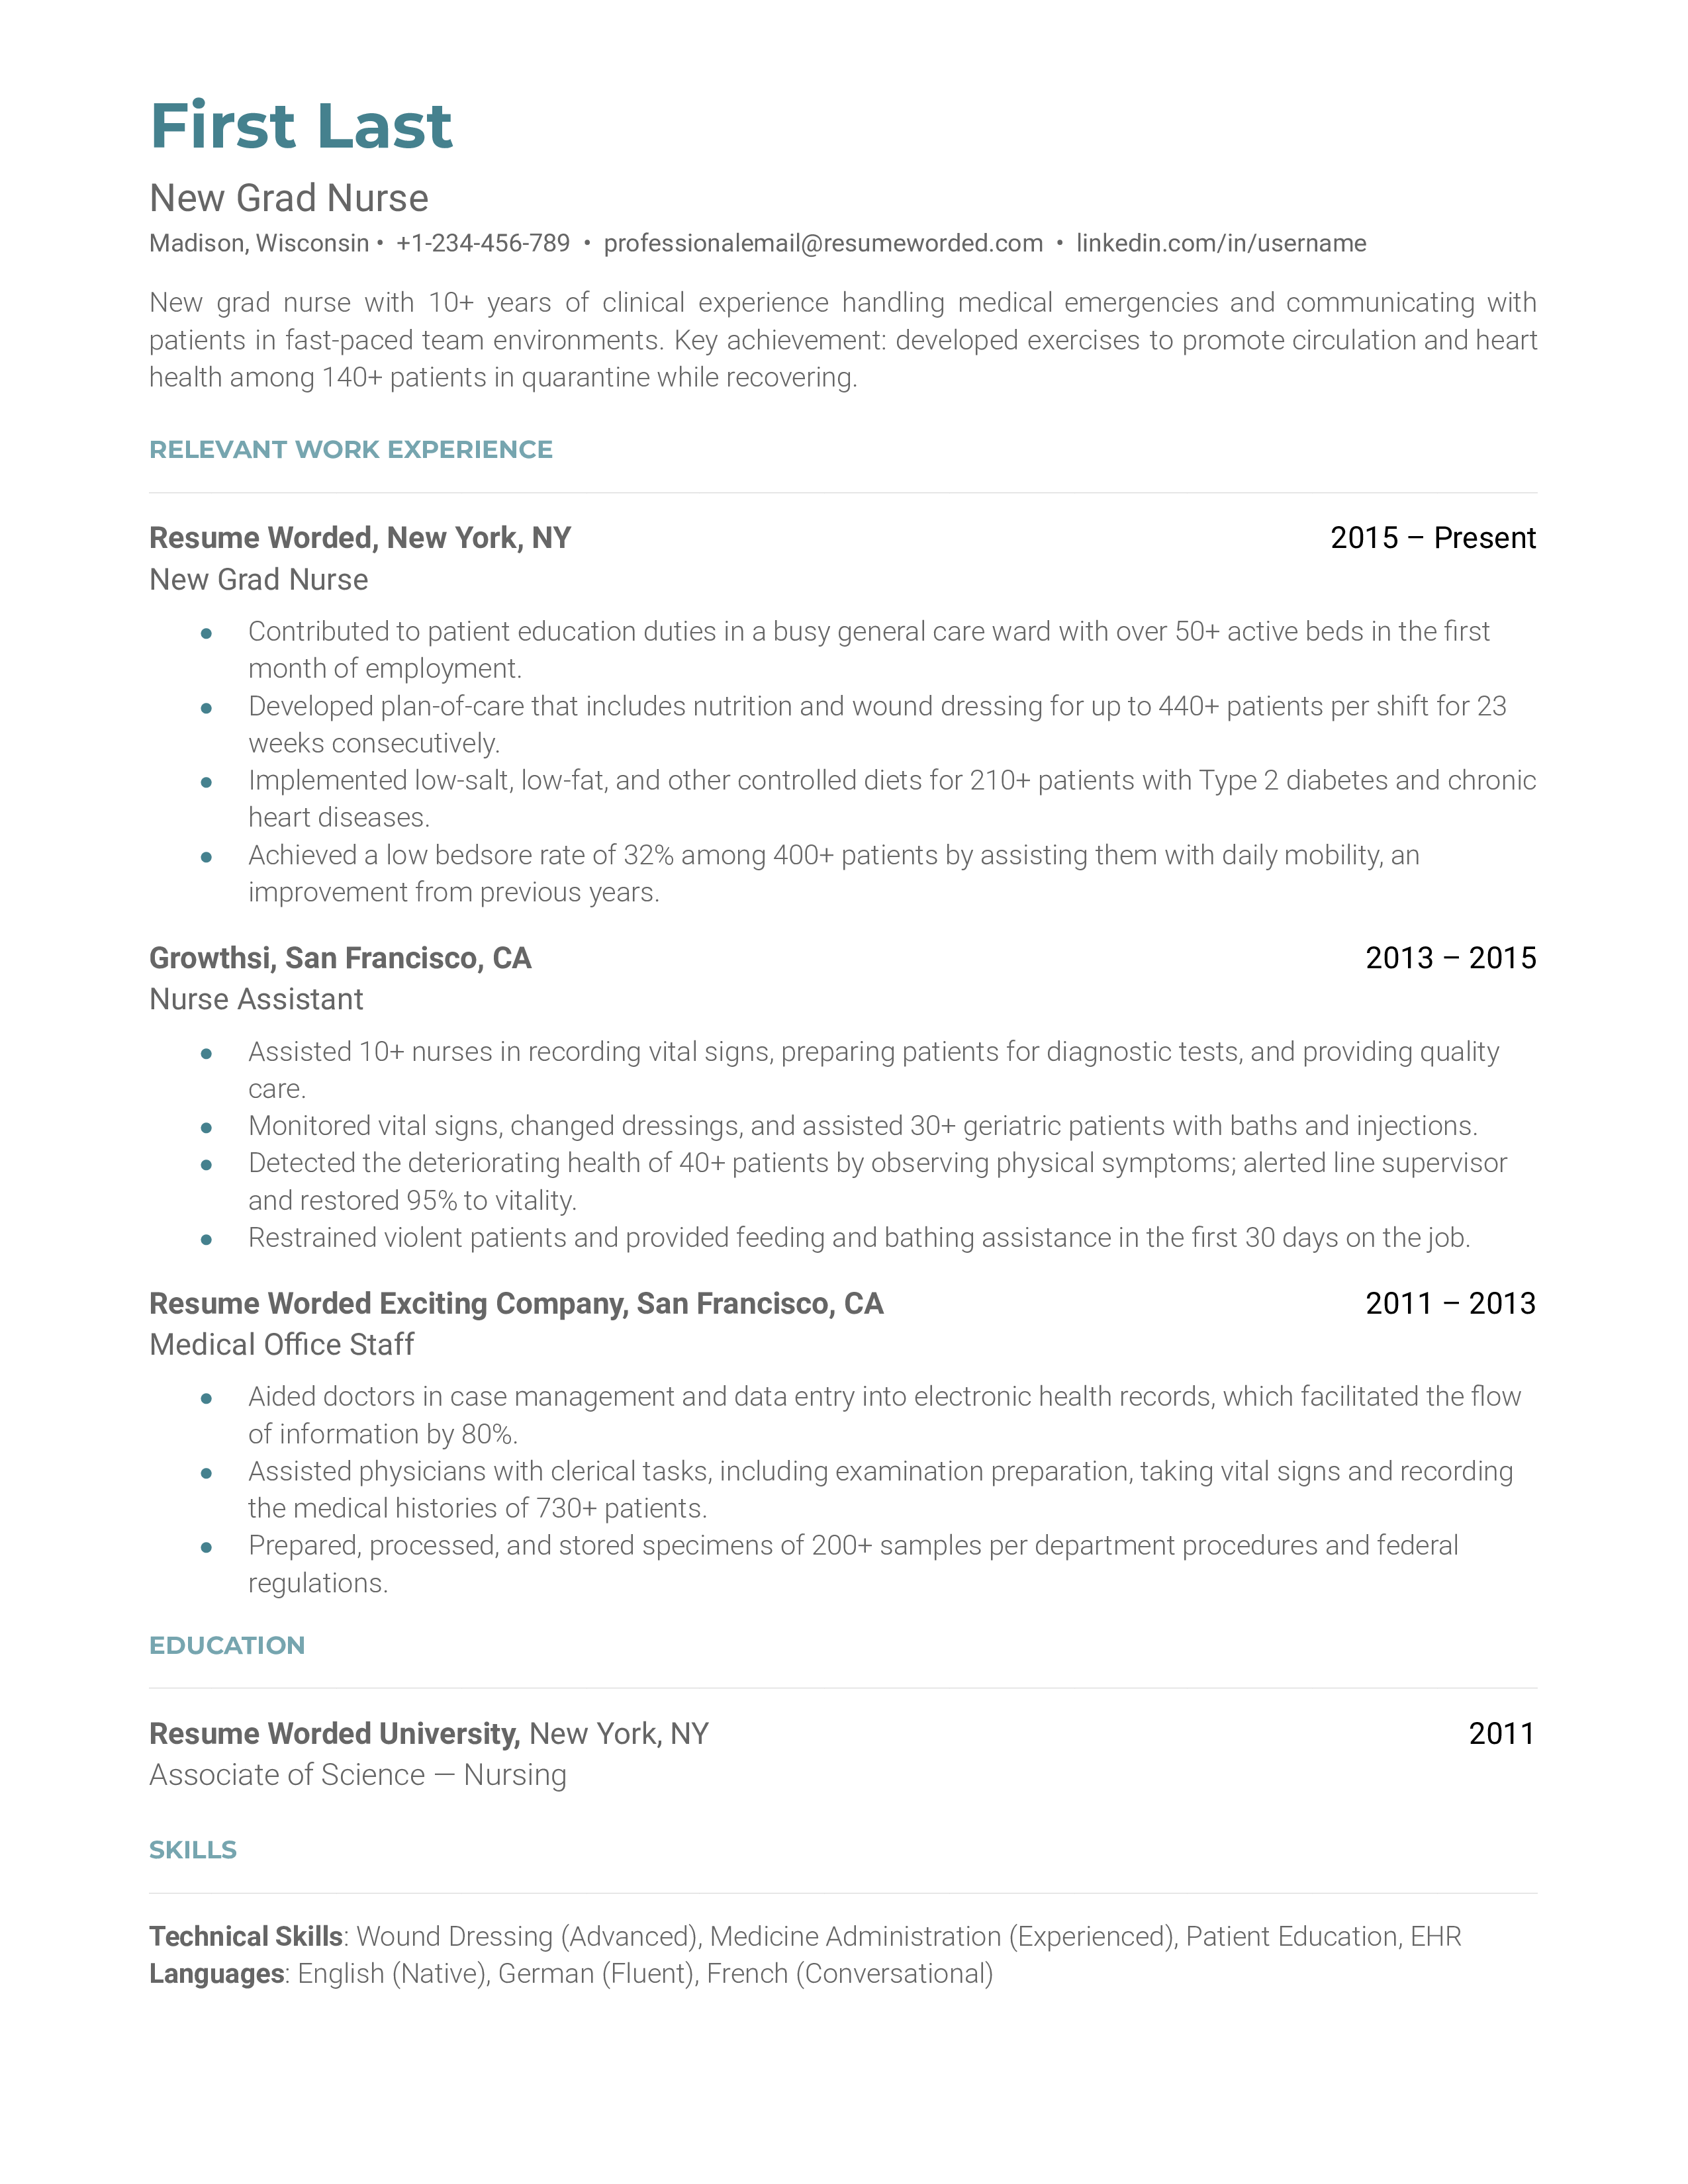 New grad nurse resume showcasing clinical experience and relevant skills.